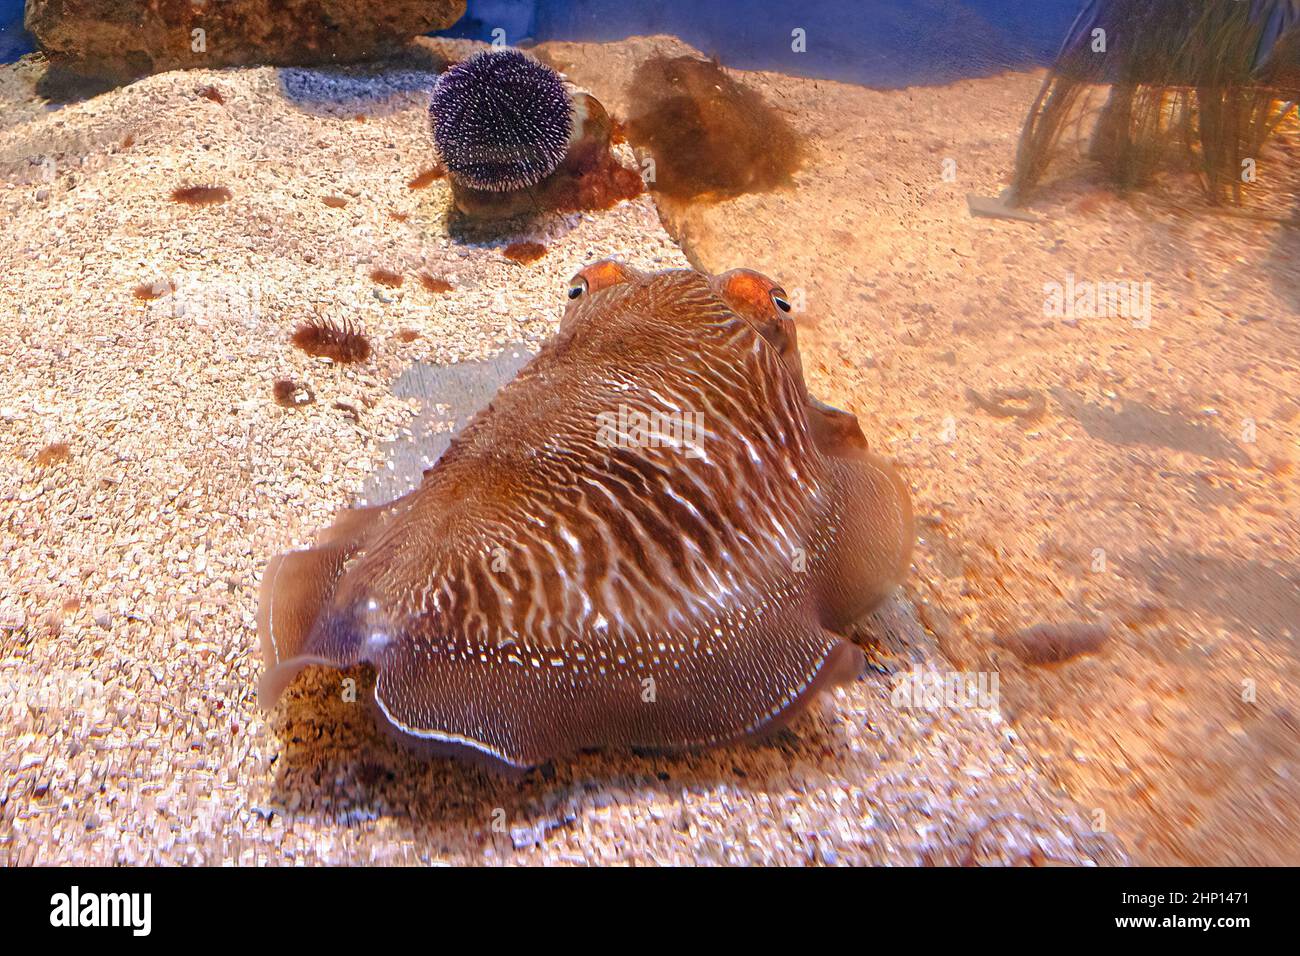 Sepia officinalis species living in the Mediterranean Sea, North Sea, and Baltic Sea or South Africa. Front view of a Common cuttlefish in an aquarium Stock Photo